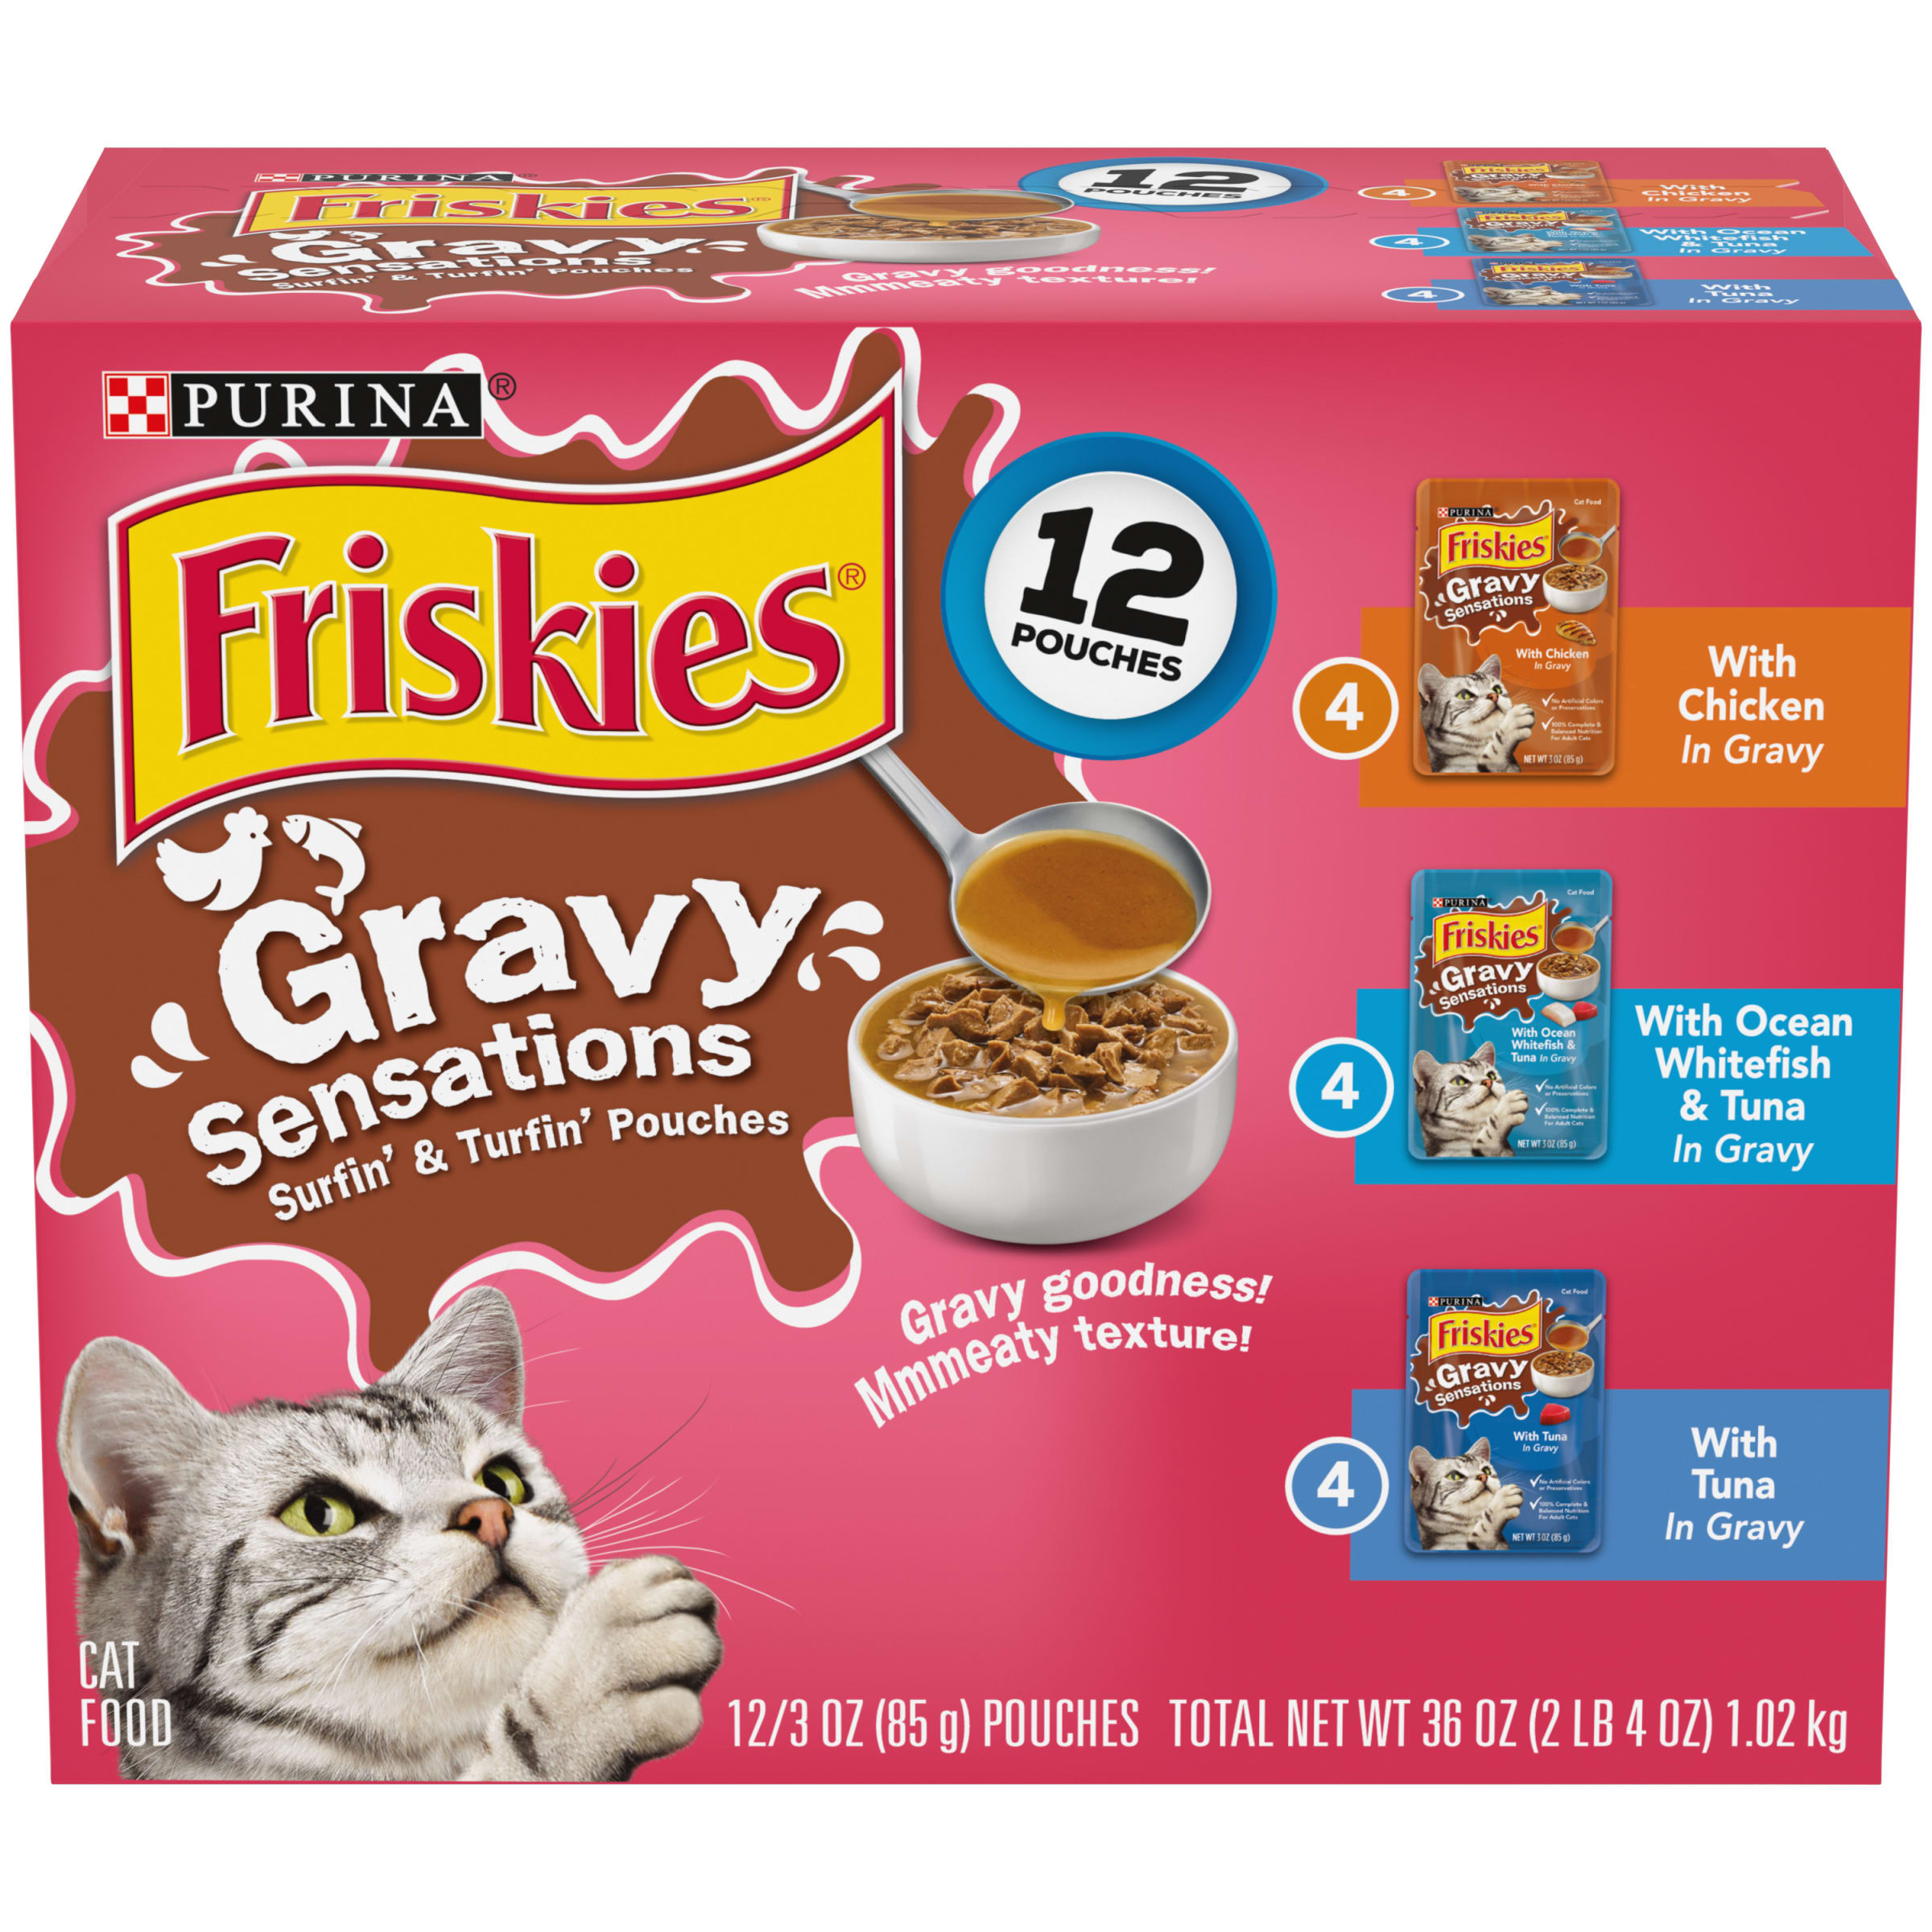 Purina Friskies Gravy Sensations Surfin' and Turfin' Pouches, Gravy Wet Cat Food Variety Pack - image 1 of 8